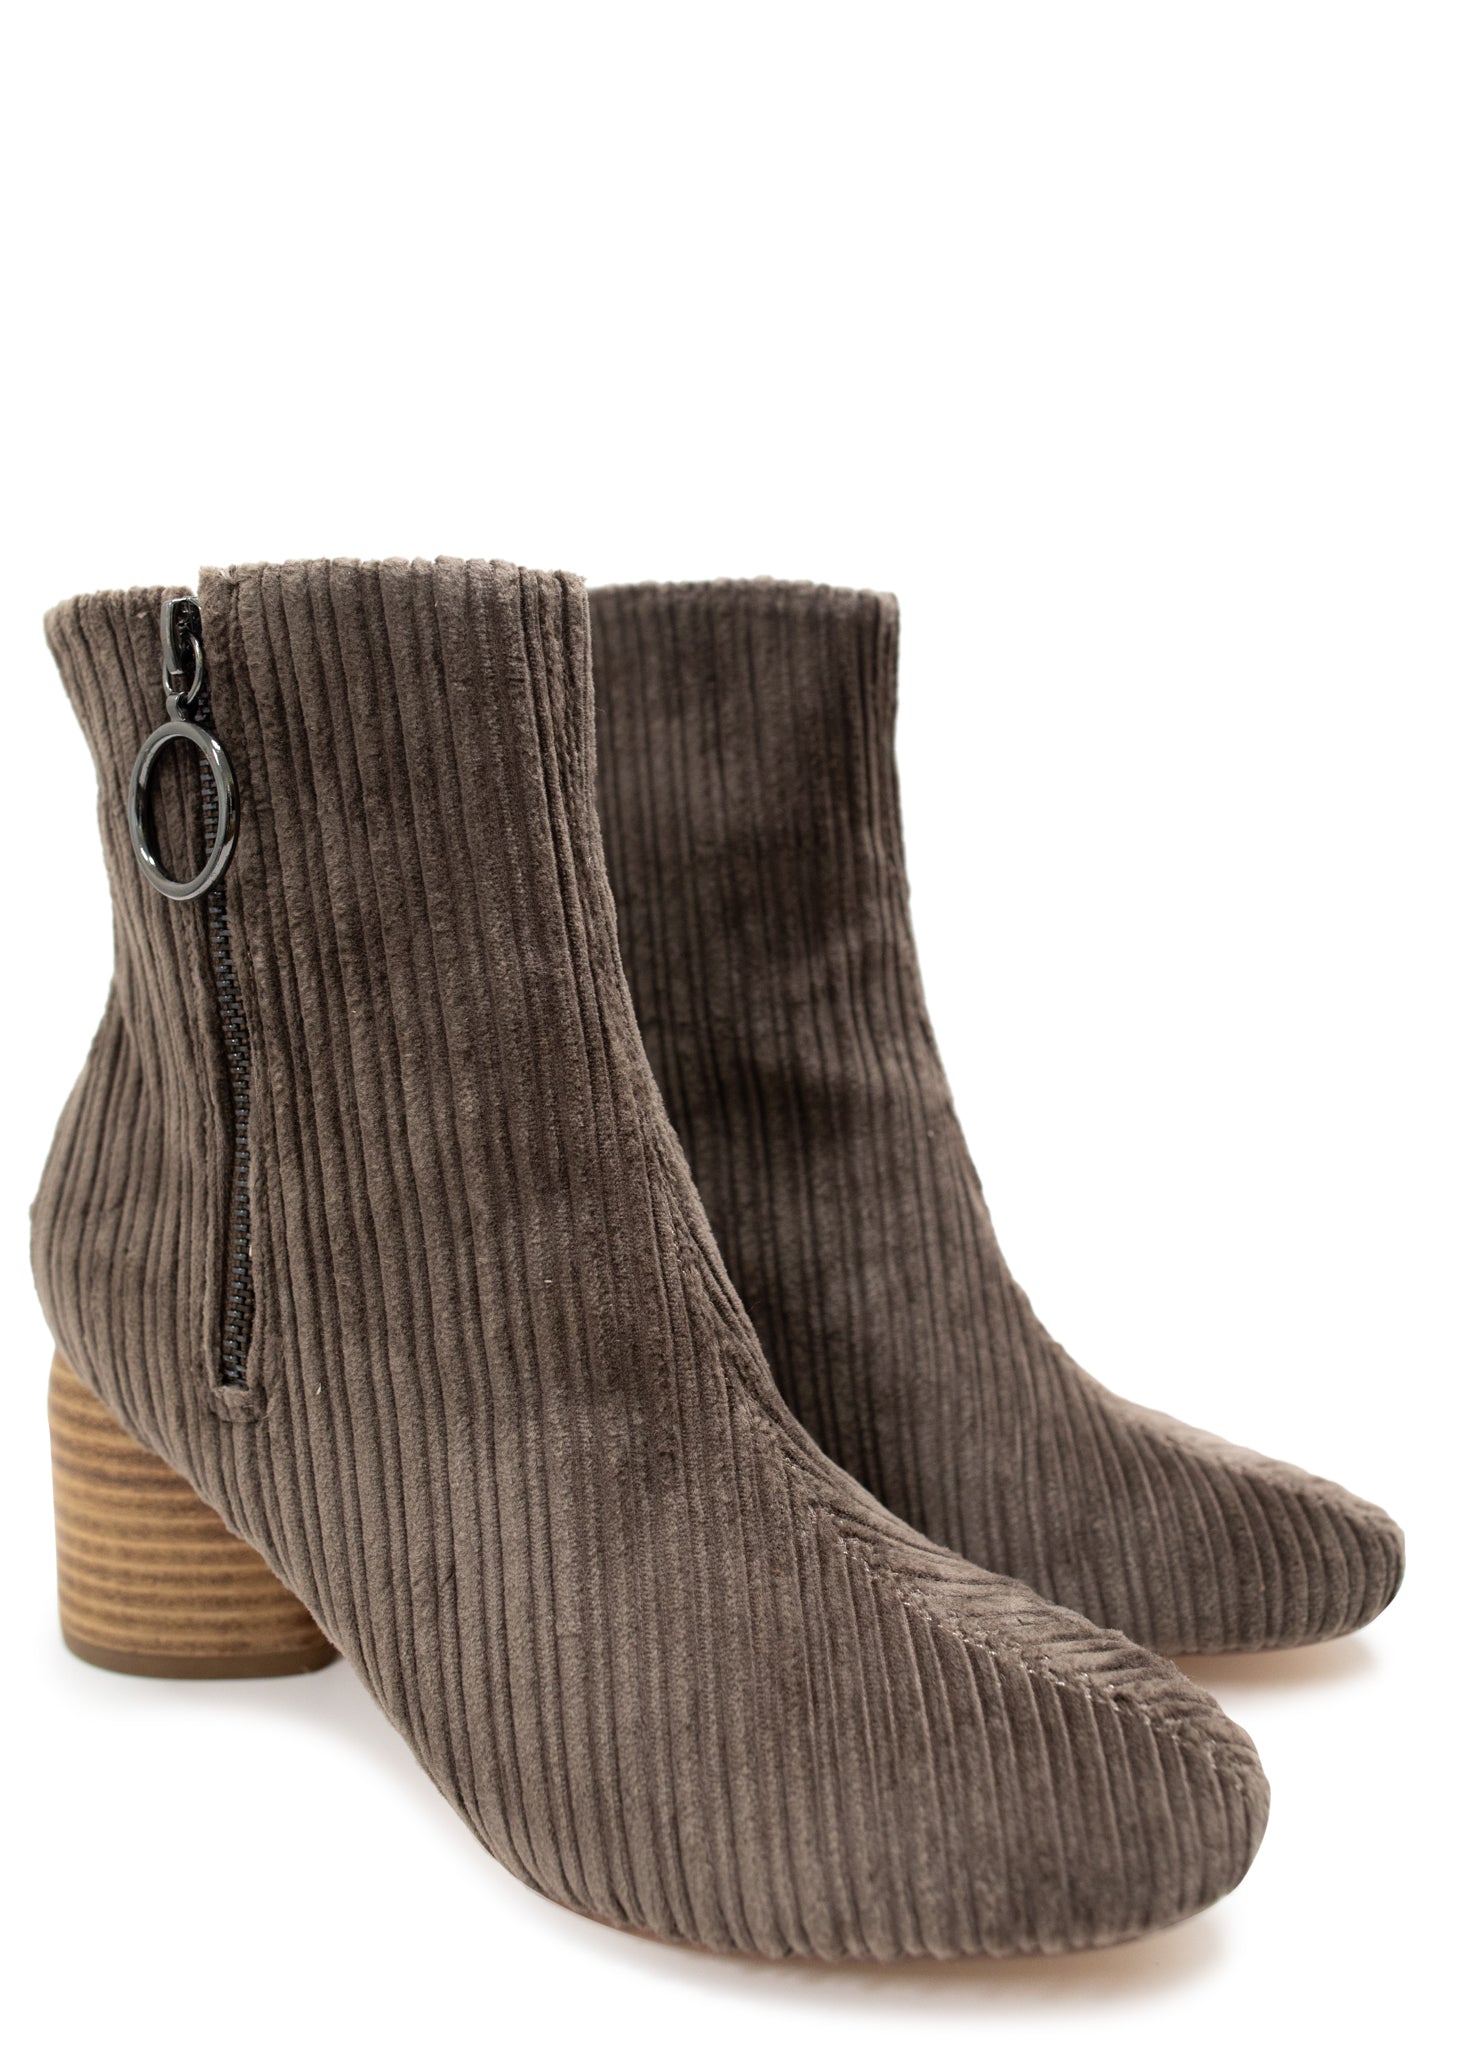 Menlee Corduroy Ankle Boots in Taupe